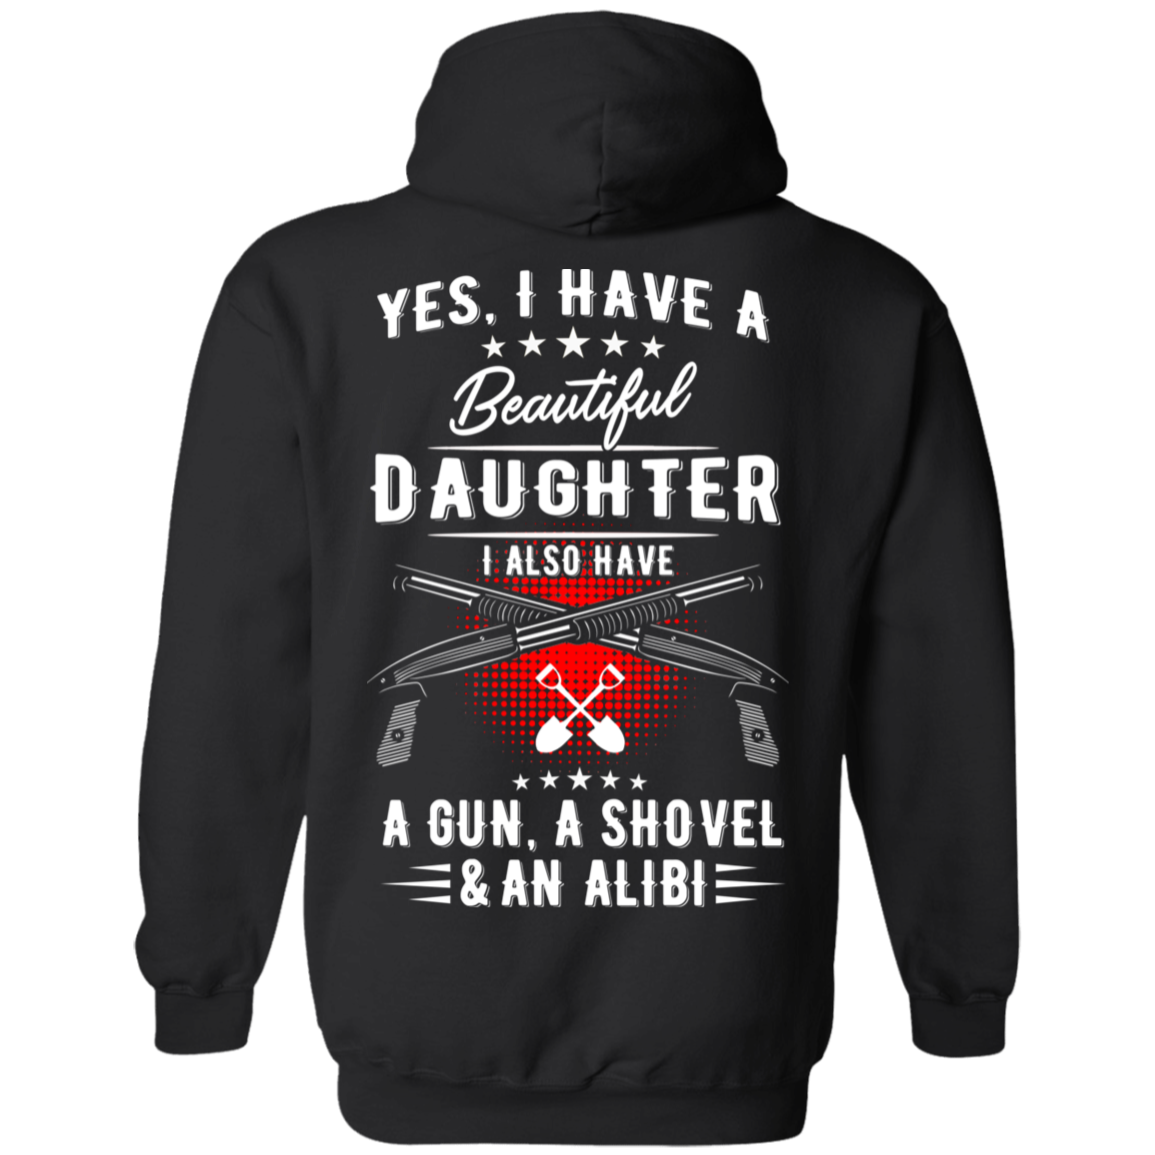 I Have A Beautiful Daughter Hoodie, Cotton/Polyester, Black